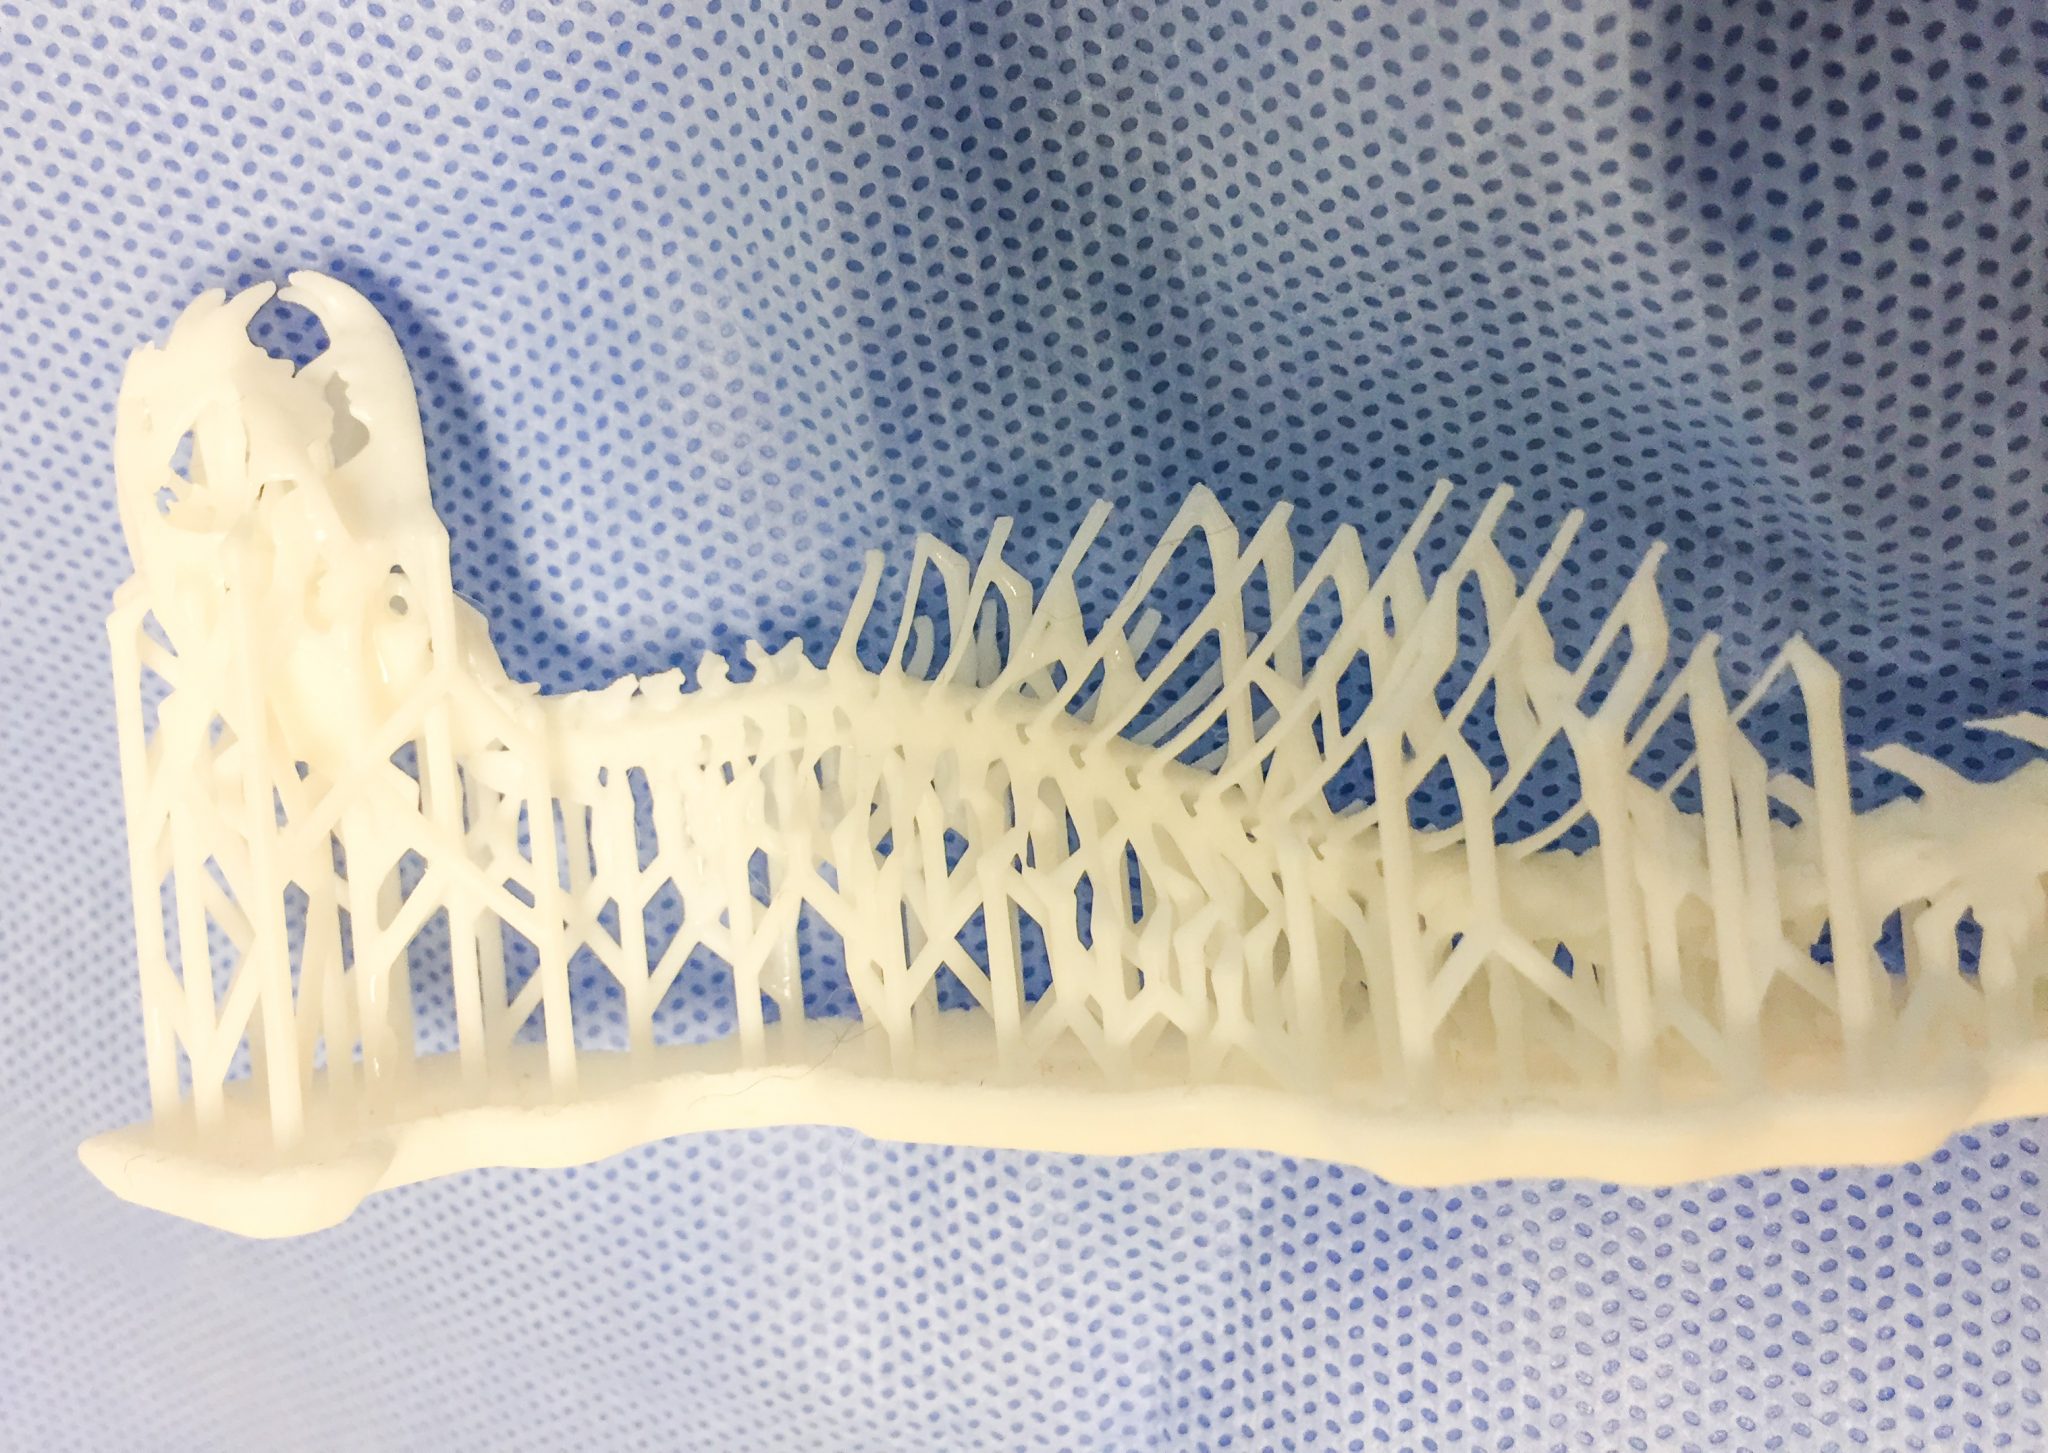 A 3D printed example of abnormal pathology in a cat. Image via Lincoln Memorial University